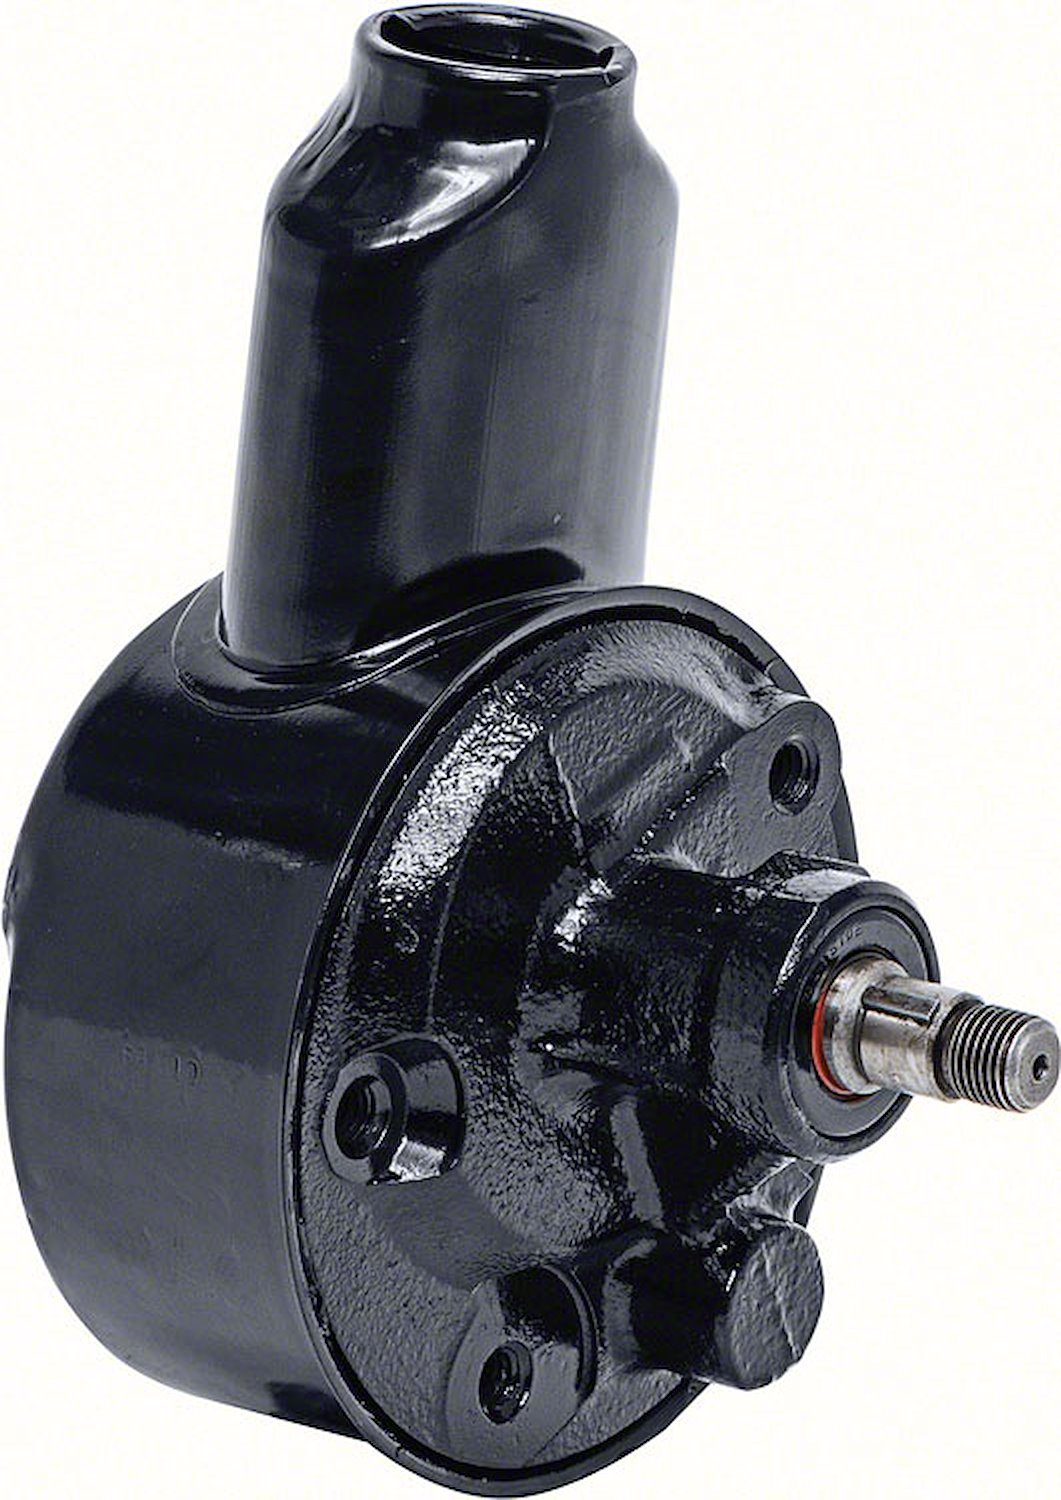 A6099 Power Steering Pump 1964-1969 Chevrolet; With "Banjo Style" Reservoir; Remanufactured